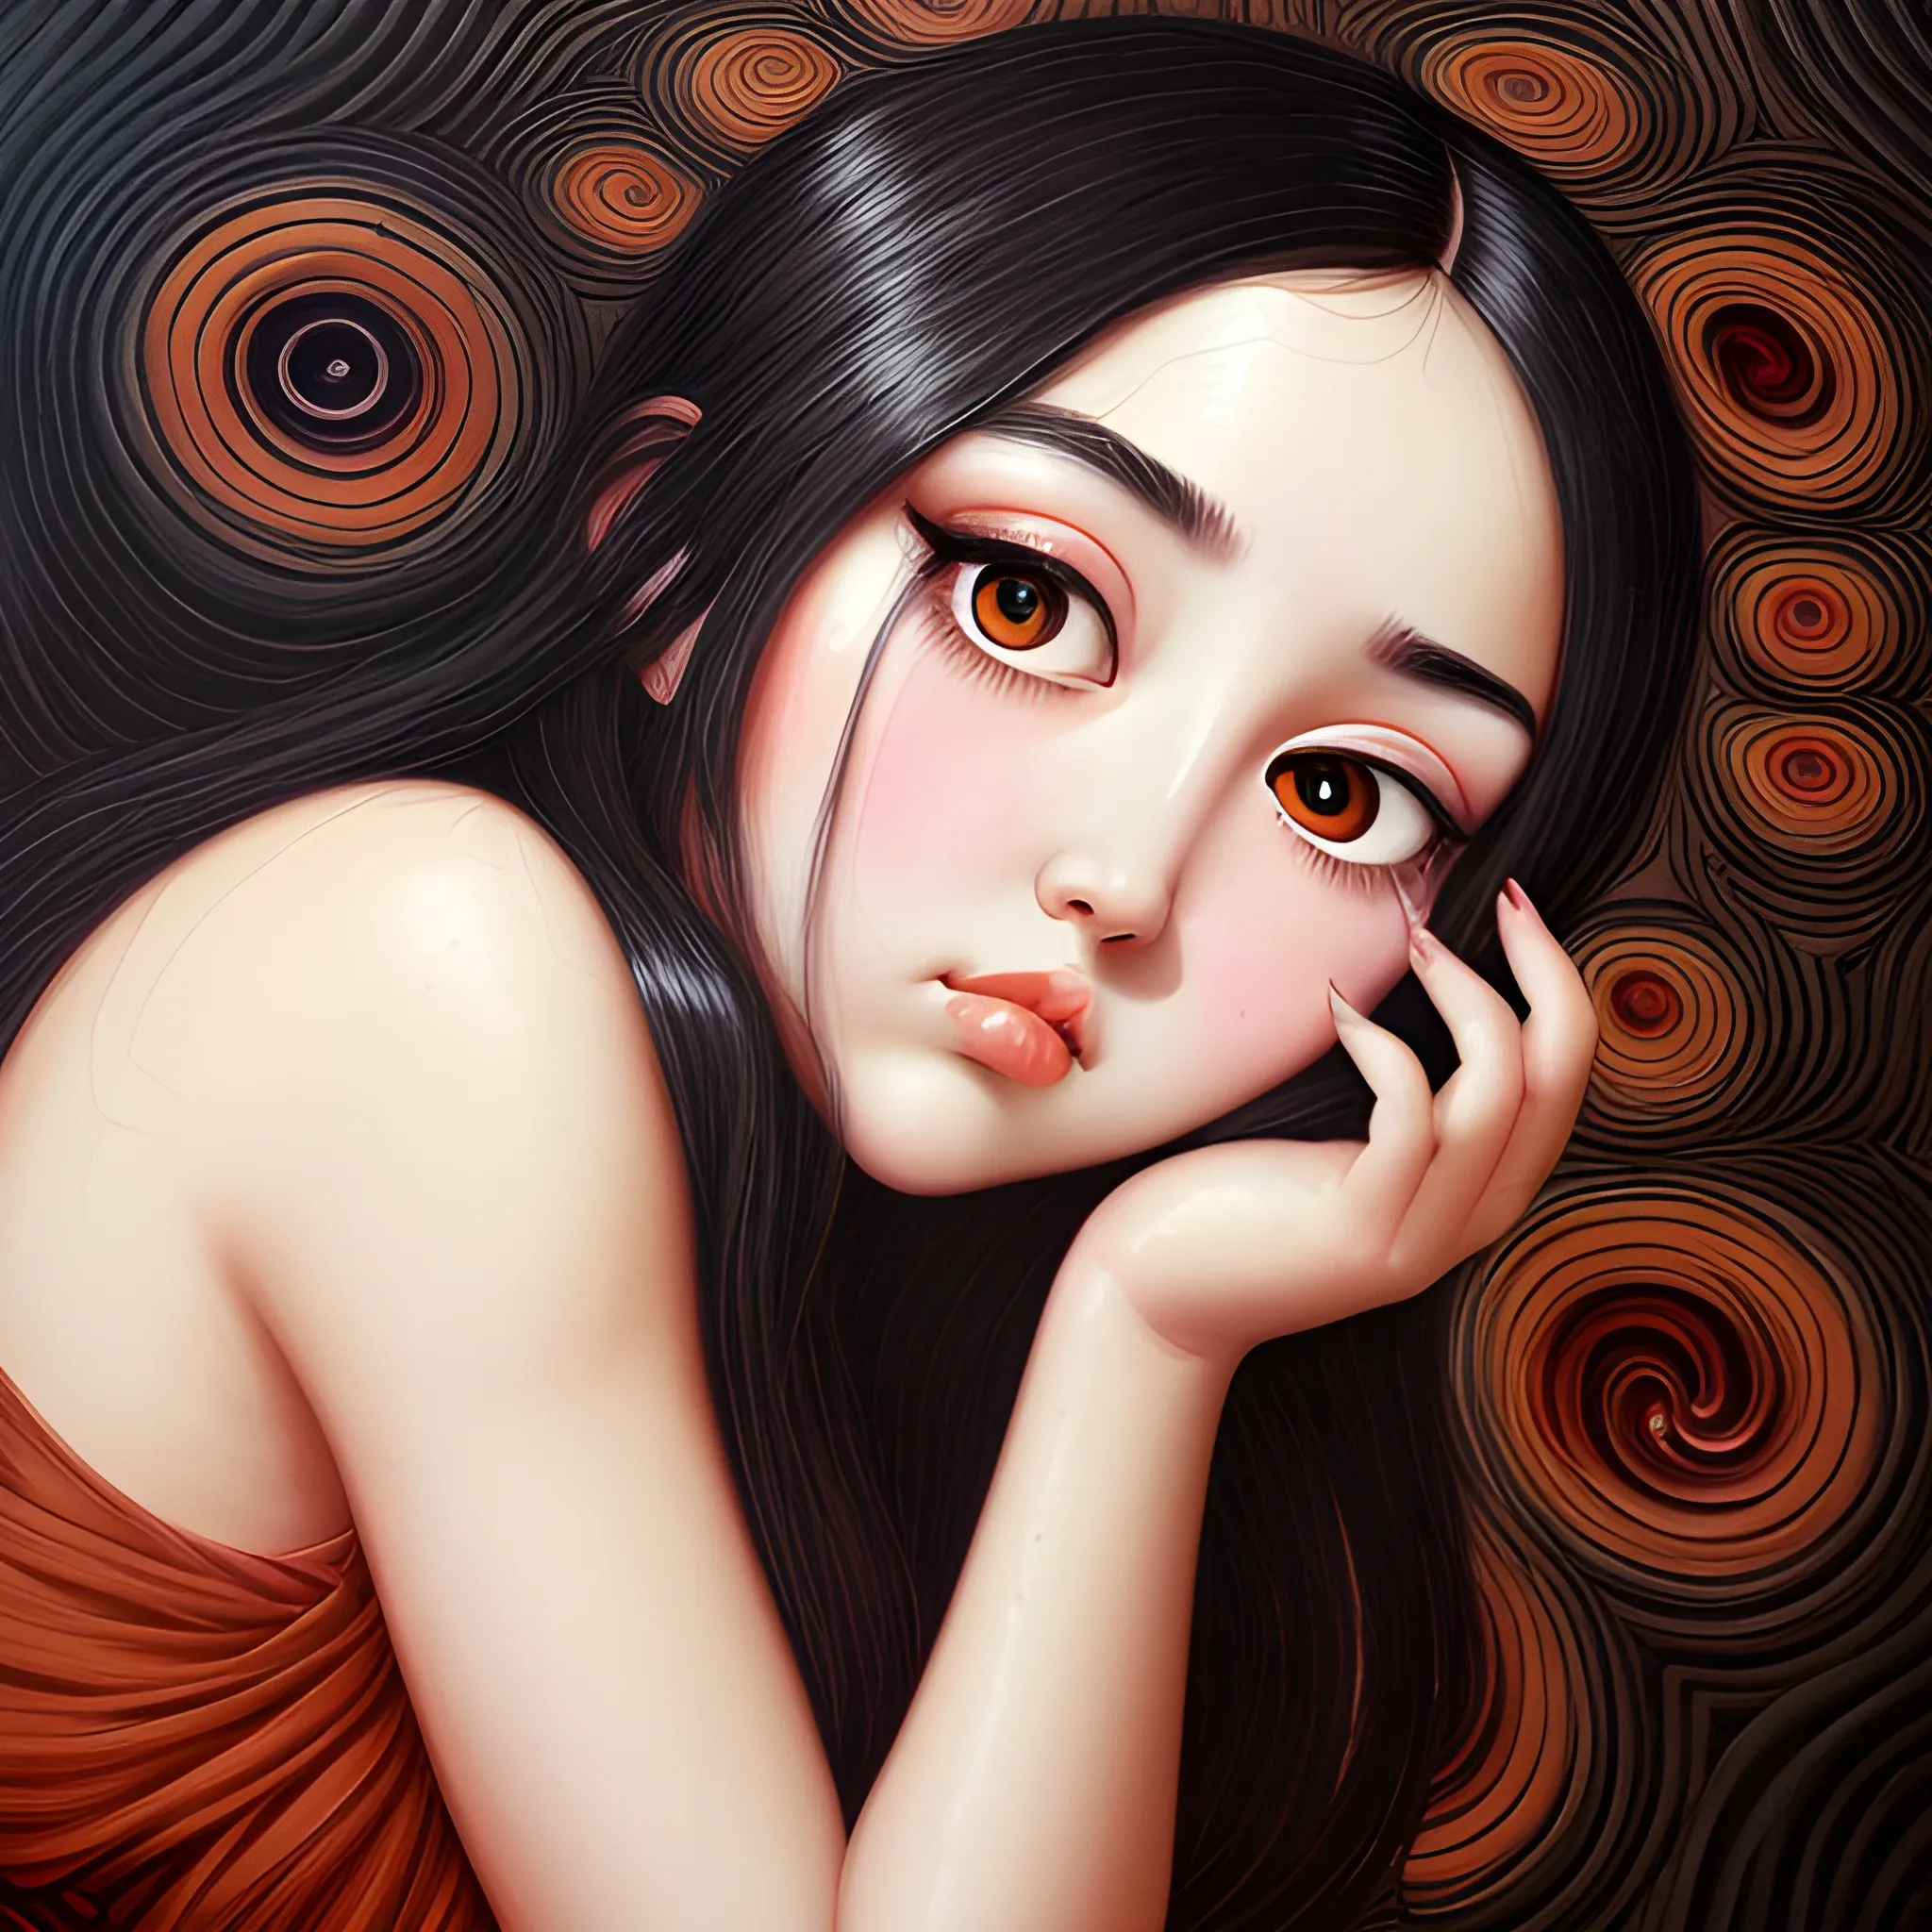 (((high detail))), best quality, Warm Colors, (detailed), (high resolution)Black long-haired female, curvy face, with rosy cheeks, big black eyes, thick eyelashes, thick peach lips, thick eyebrows, nose upturned, with a black and red dress, i want the harem ,Trippy, Oil Painting, wallper 